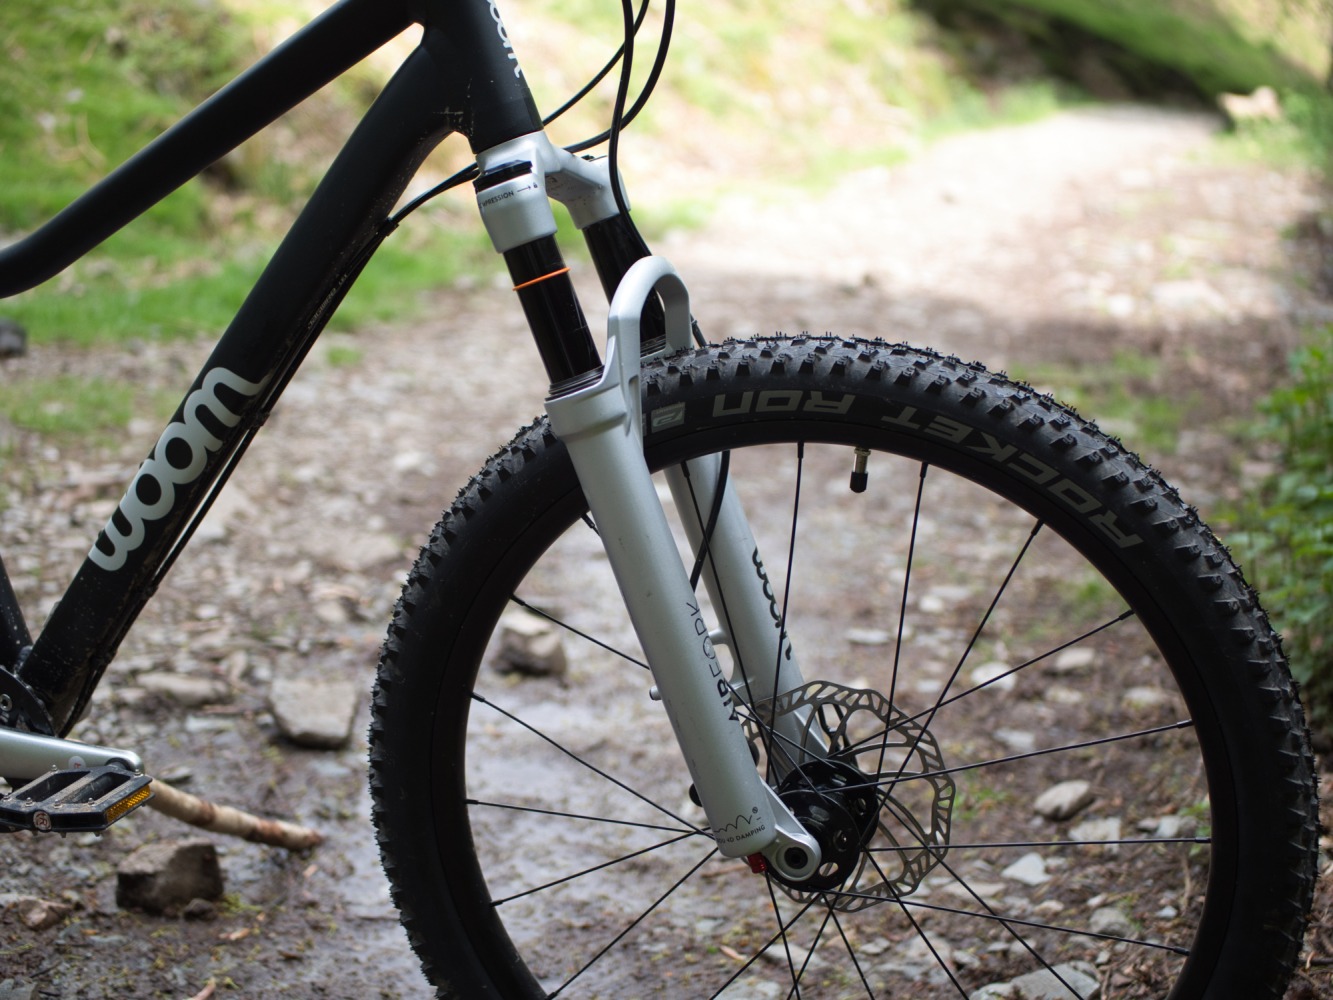 woom OFF AIR 5 review: close up shot of the woom OFF AIR 5 mountain bike suspension fork